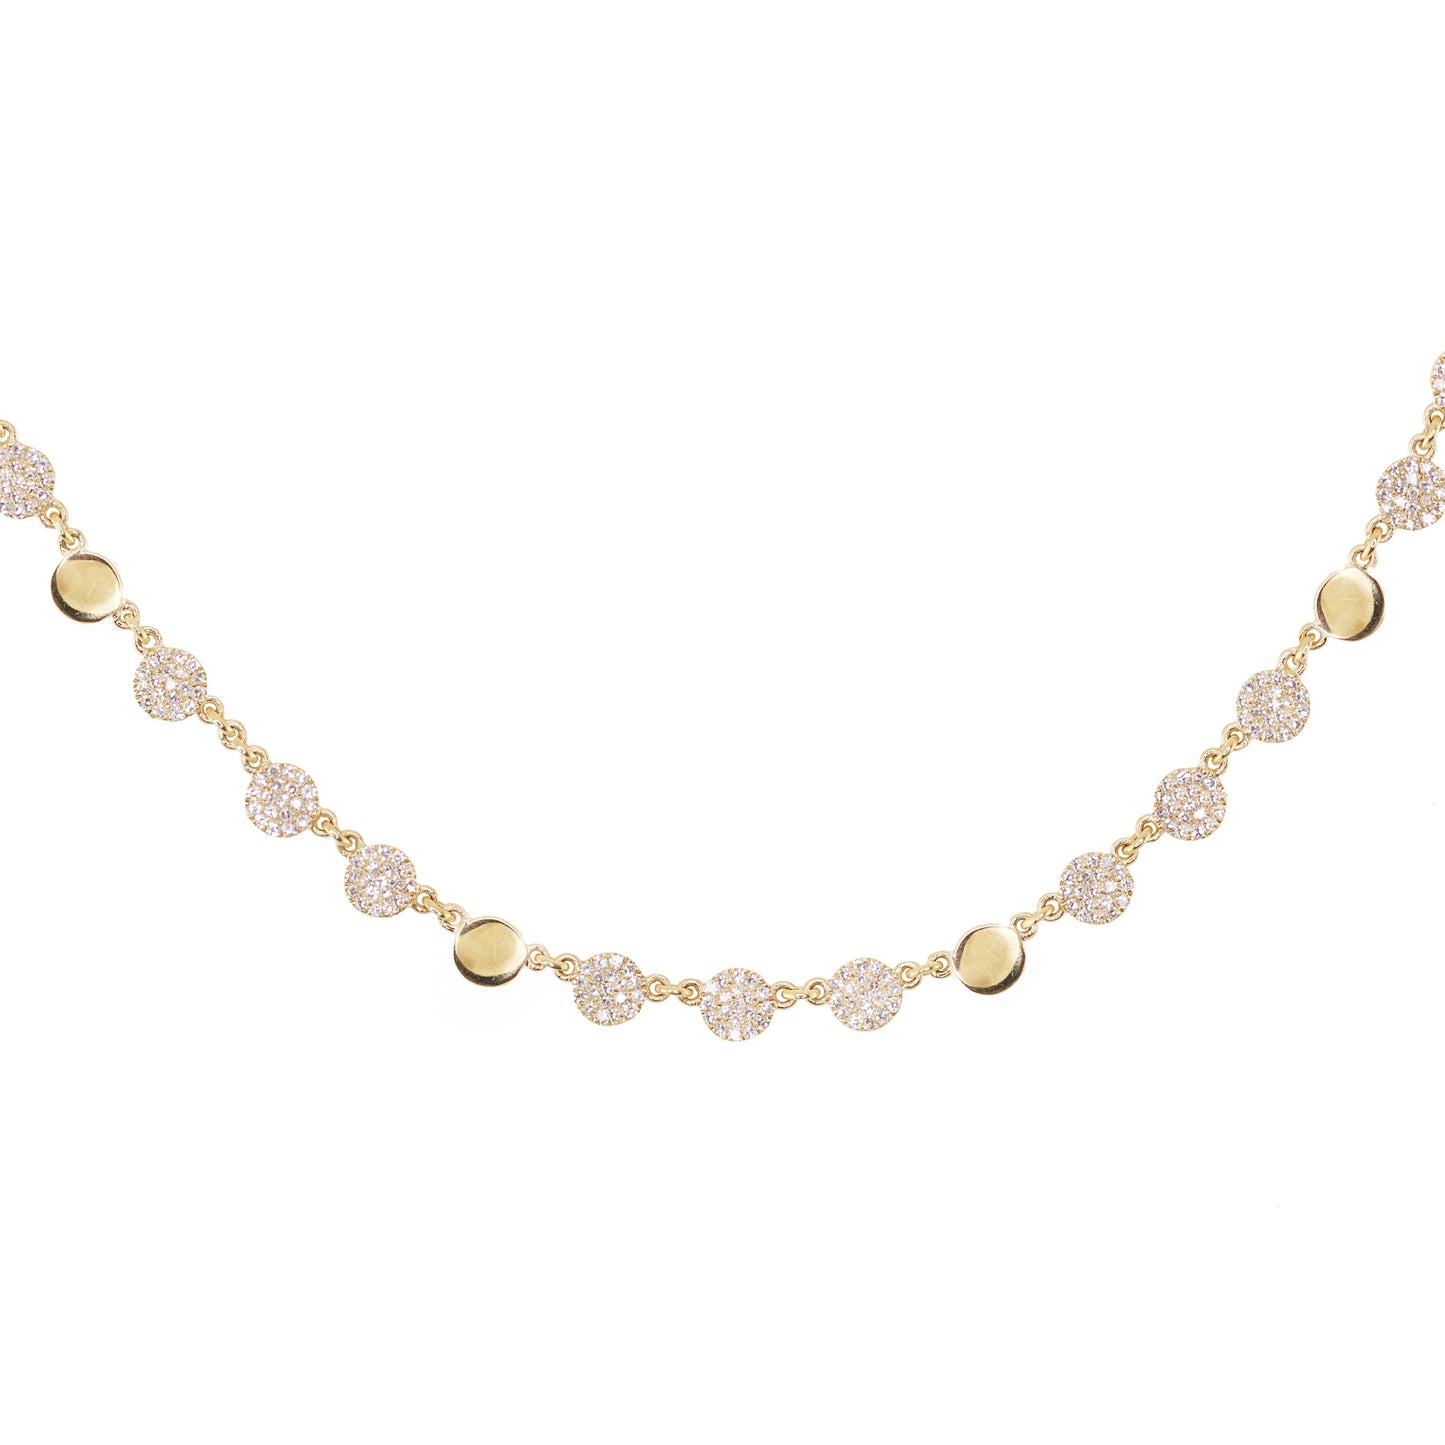 14kt gold and diamond mixed disk necklace